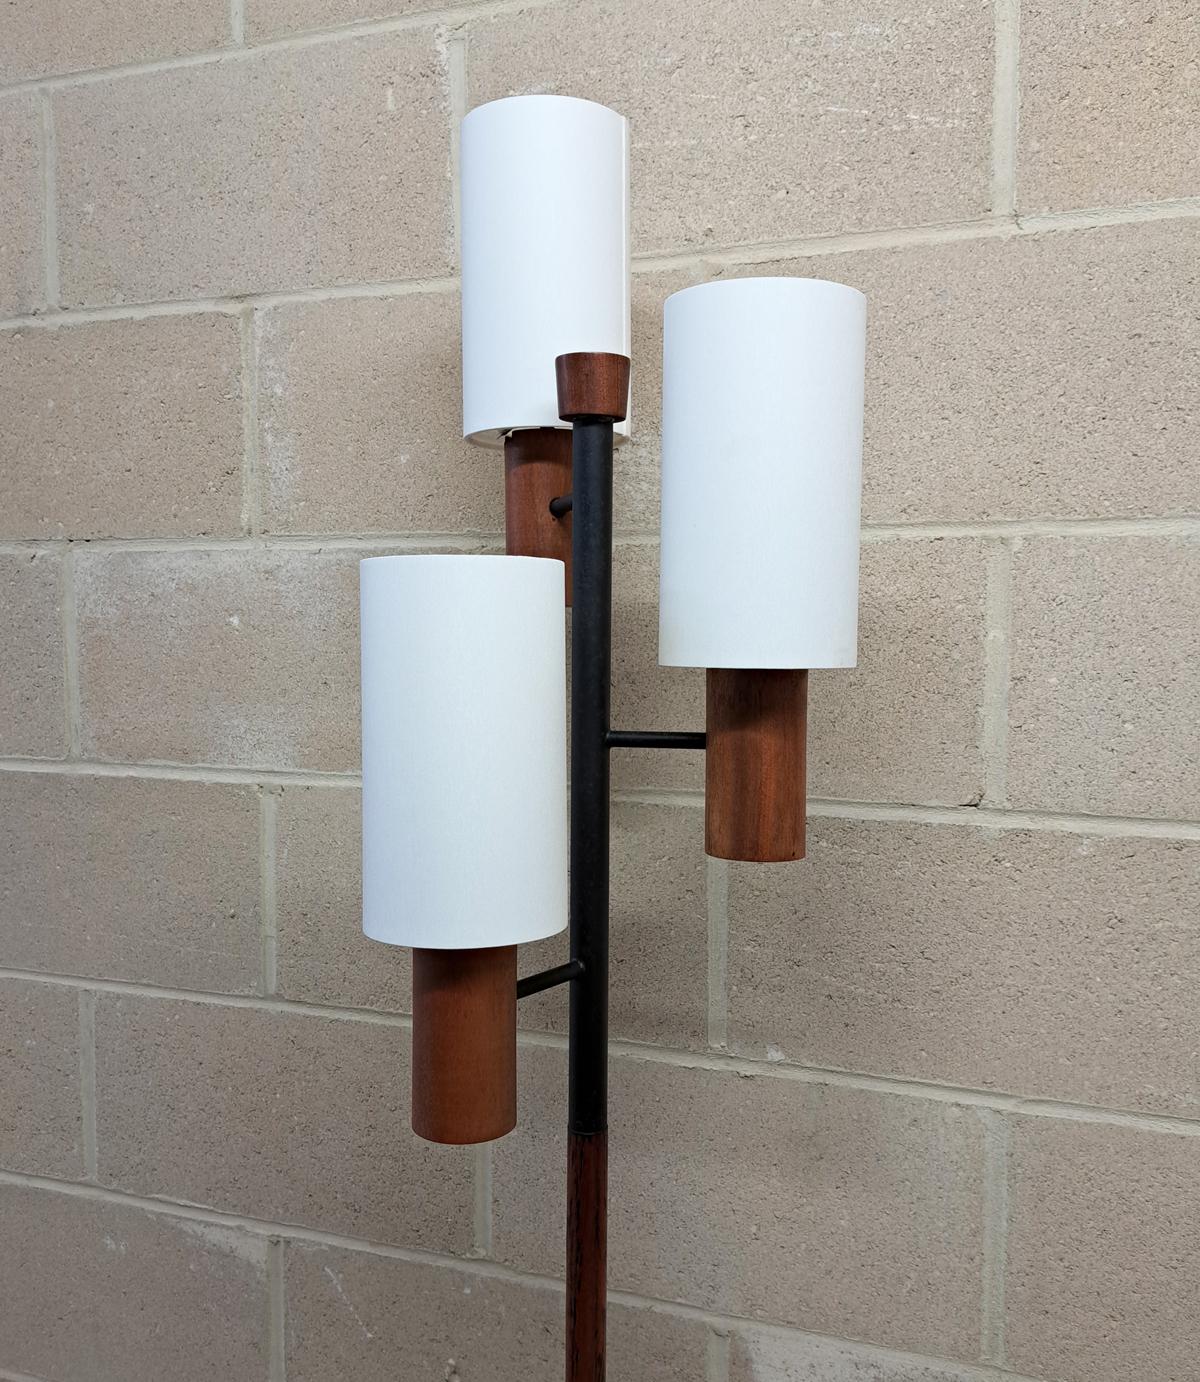 Teak and black Steel floor lamp in the style of Rispal Paris, made in the 1960s / 1970s. Three new white cotton lampshade makes the lights, newly rewired.